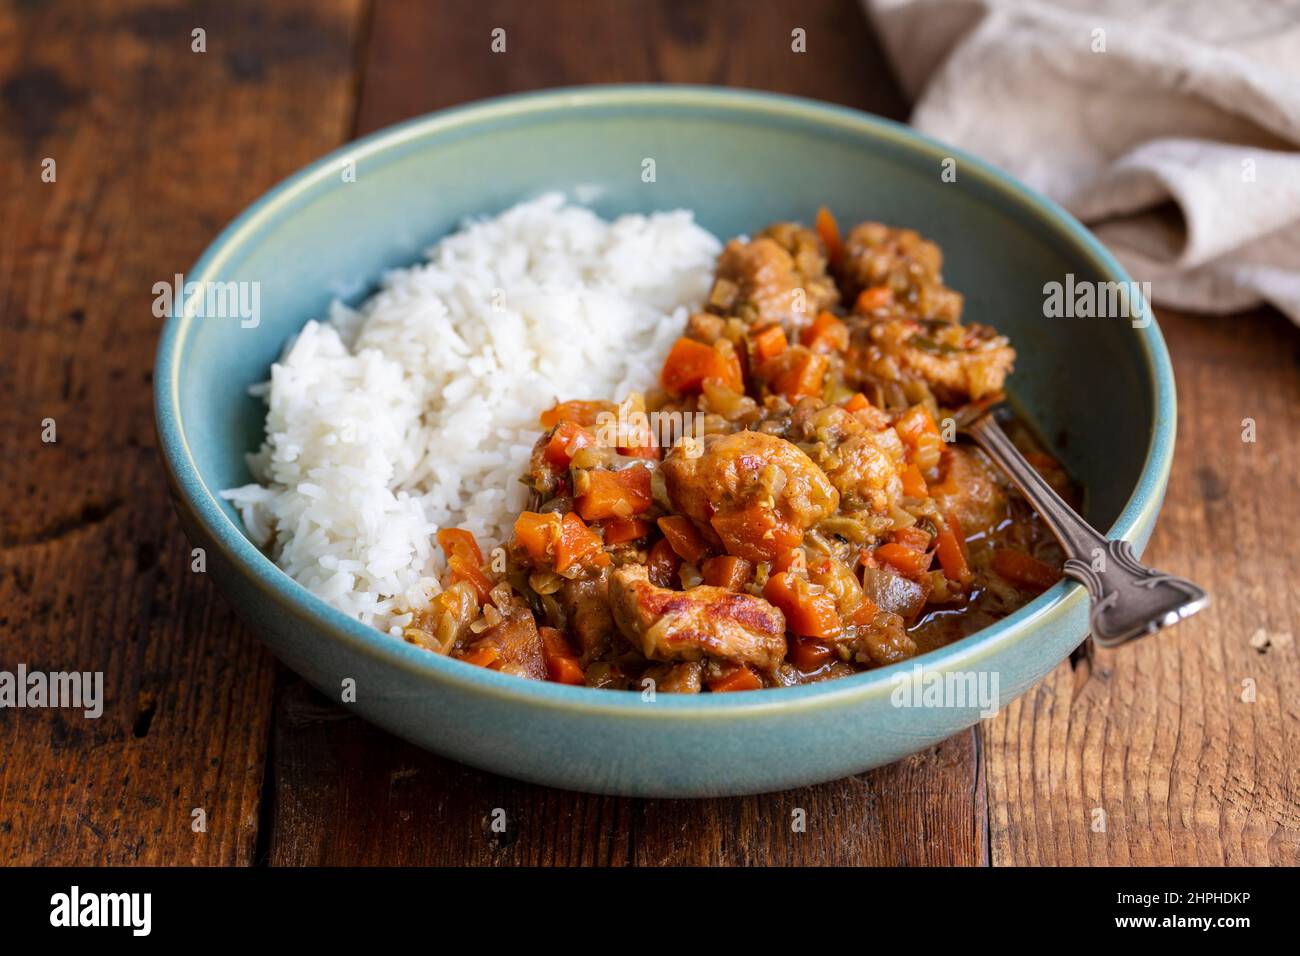 Pork and cider stew with rice Stock Photo